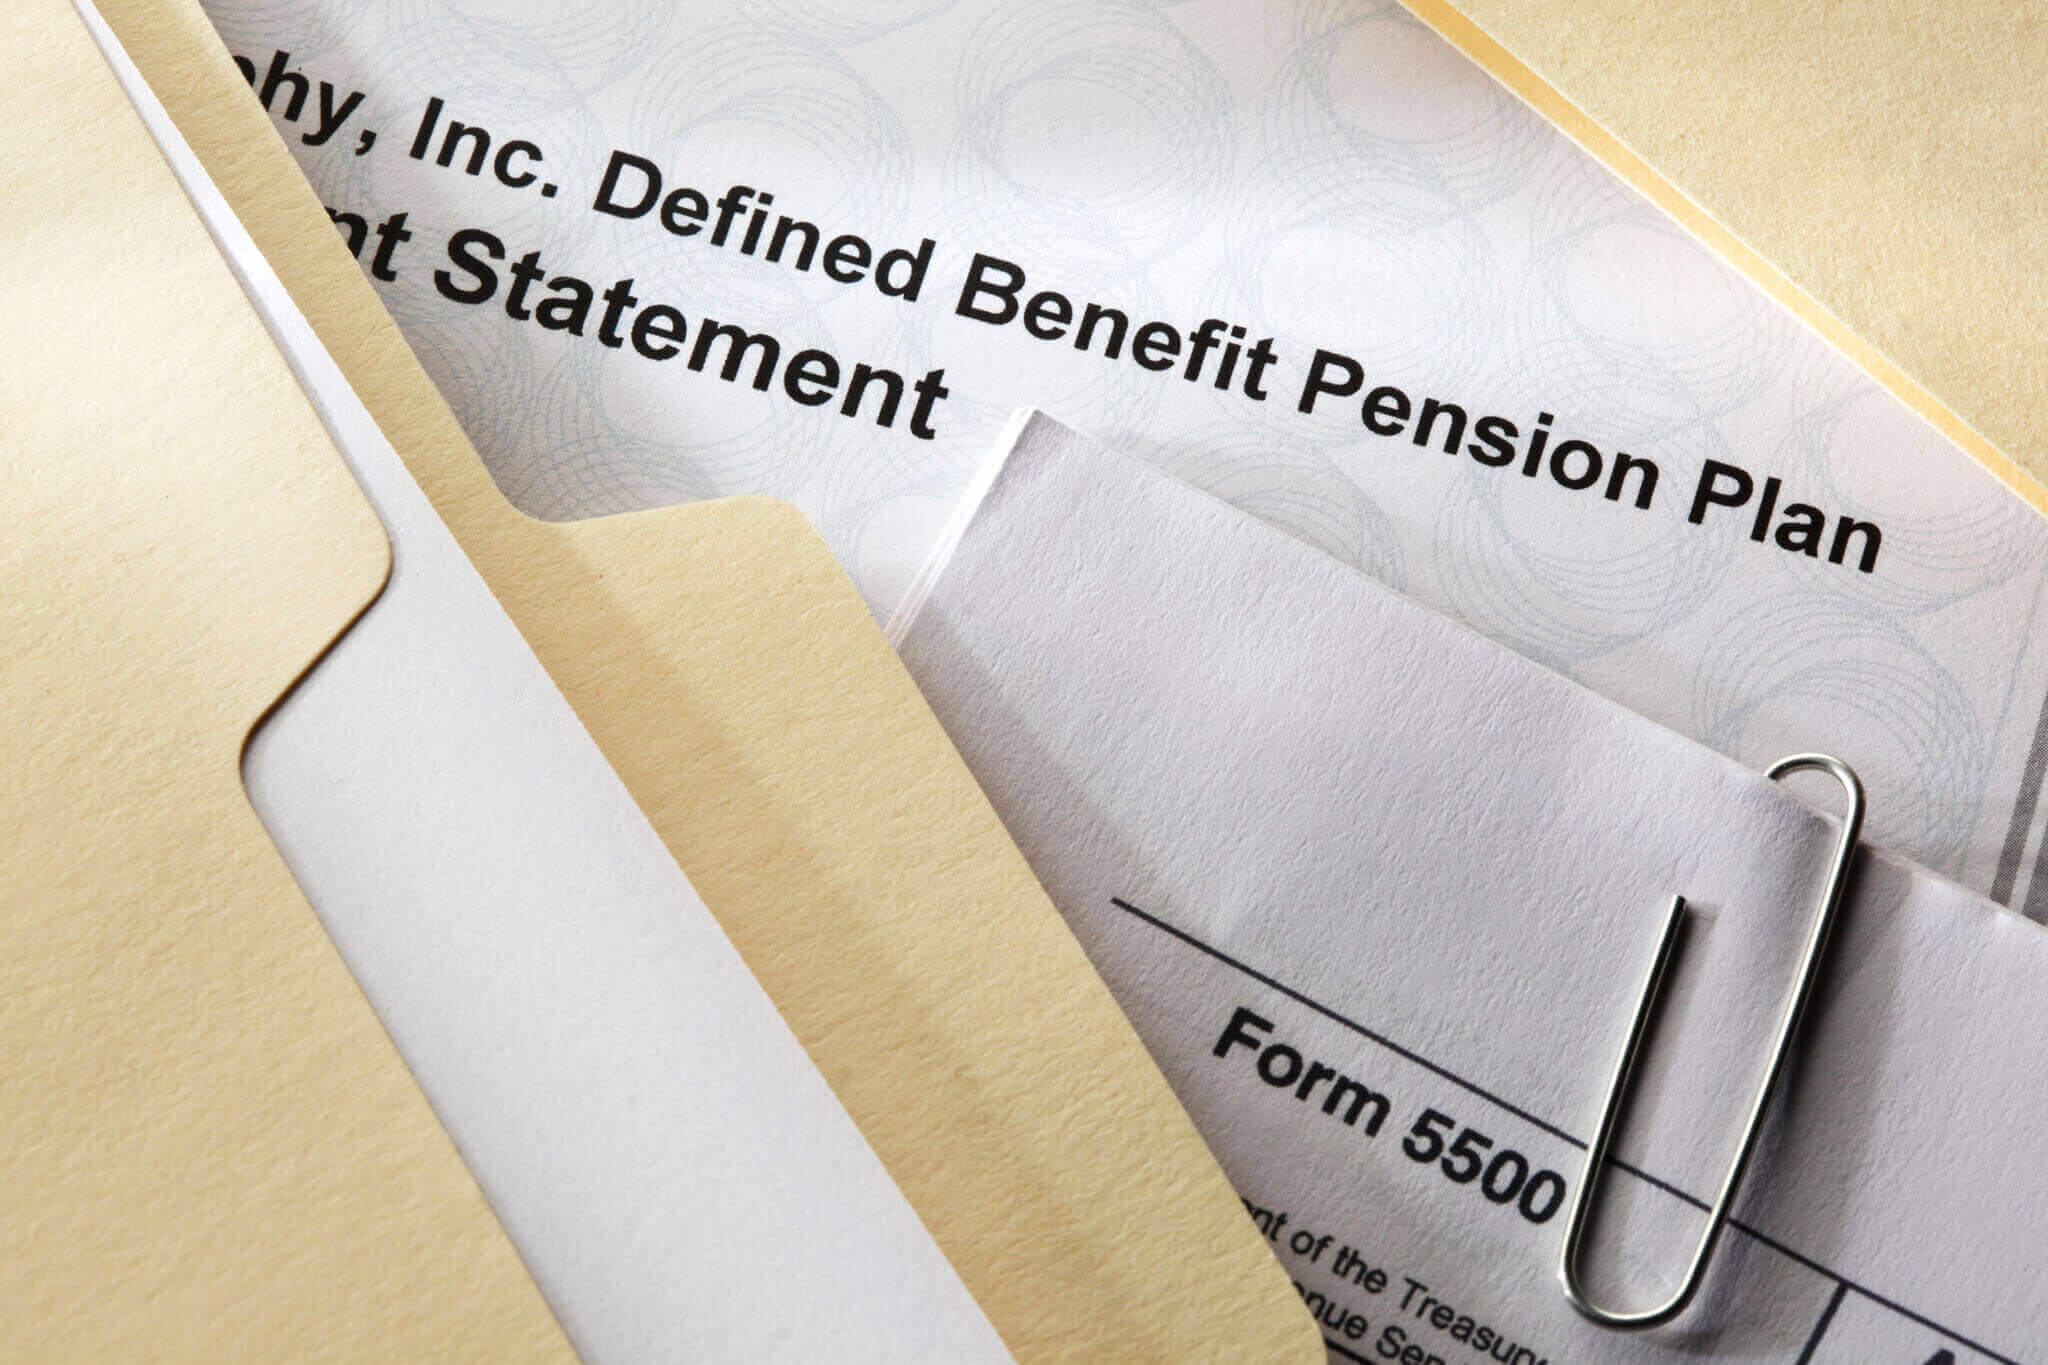 Defined benefit documents